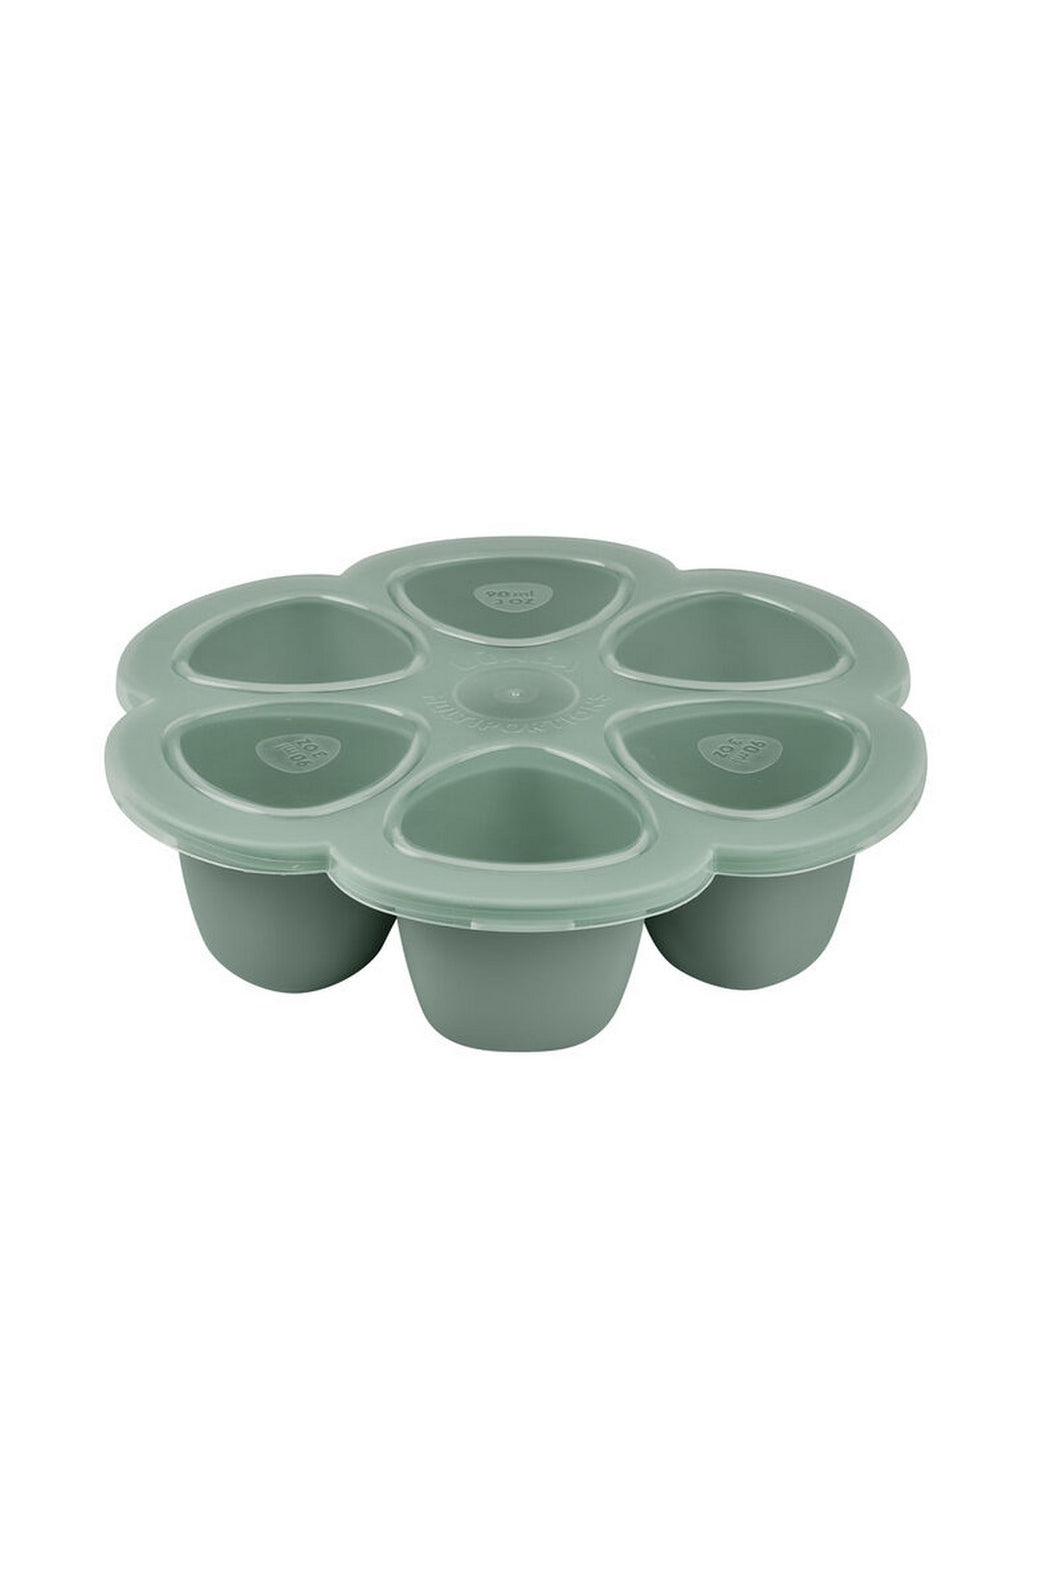 Beaba Silicone Multiportions 6 x 90ml Sage Green